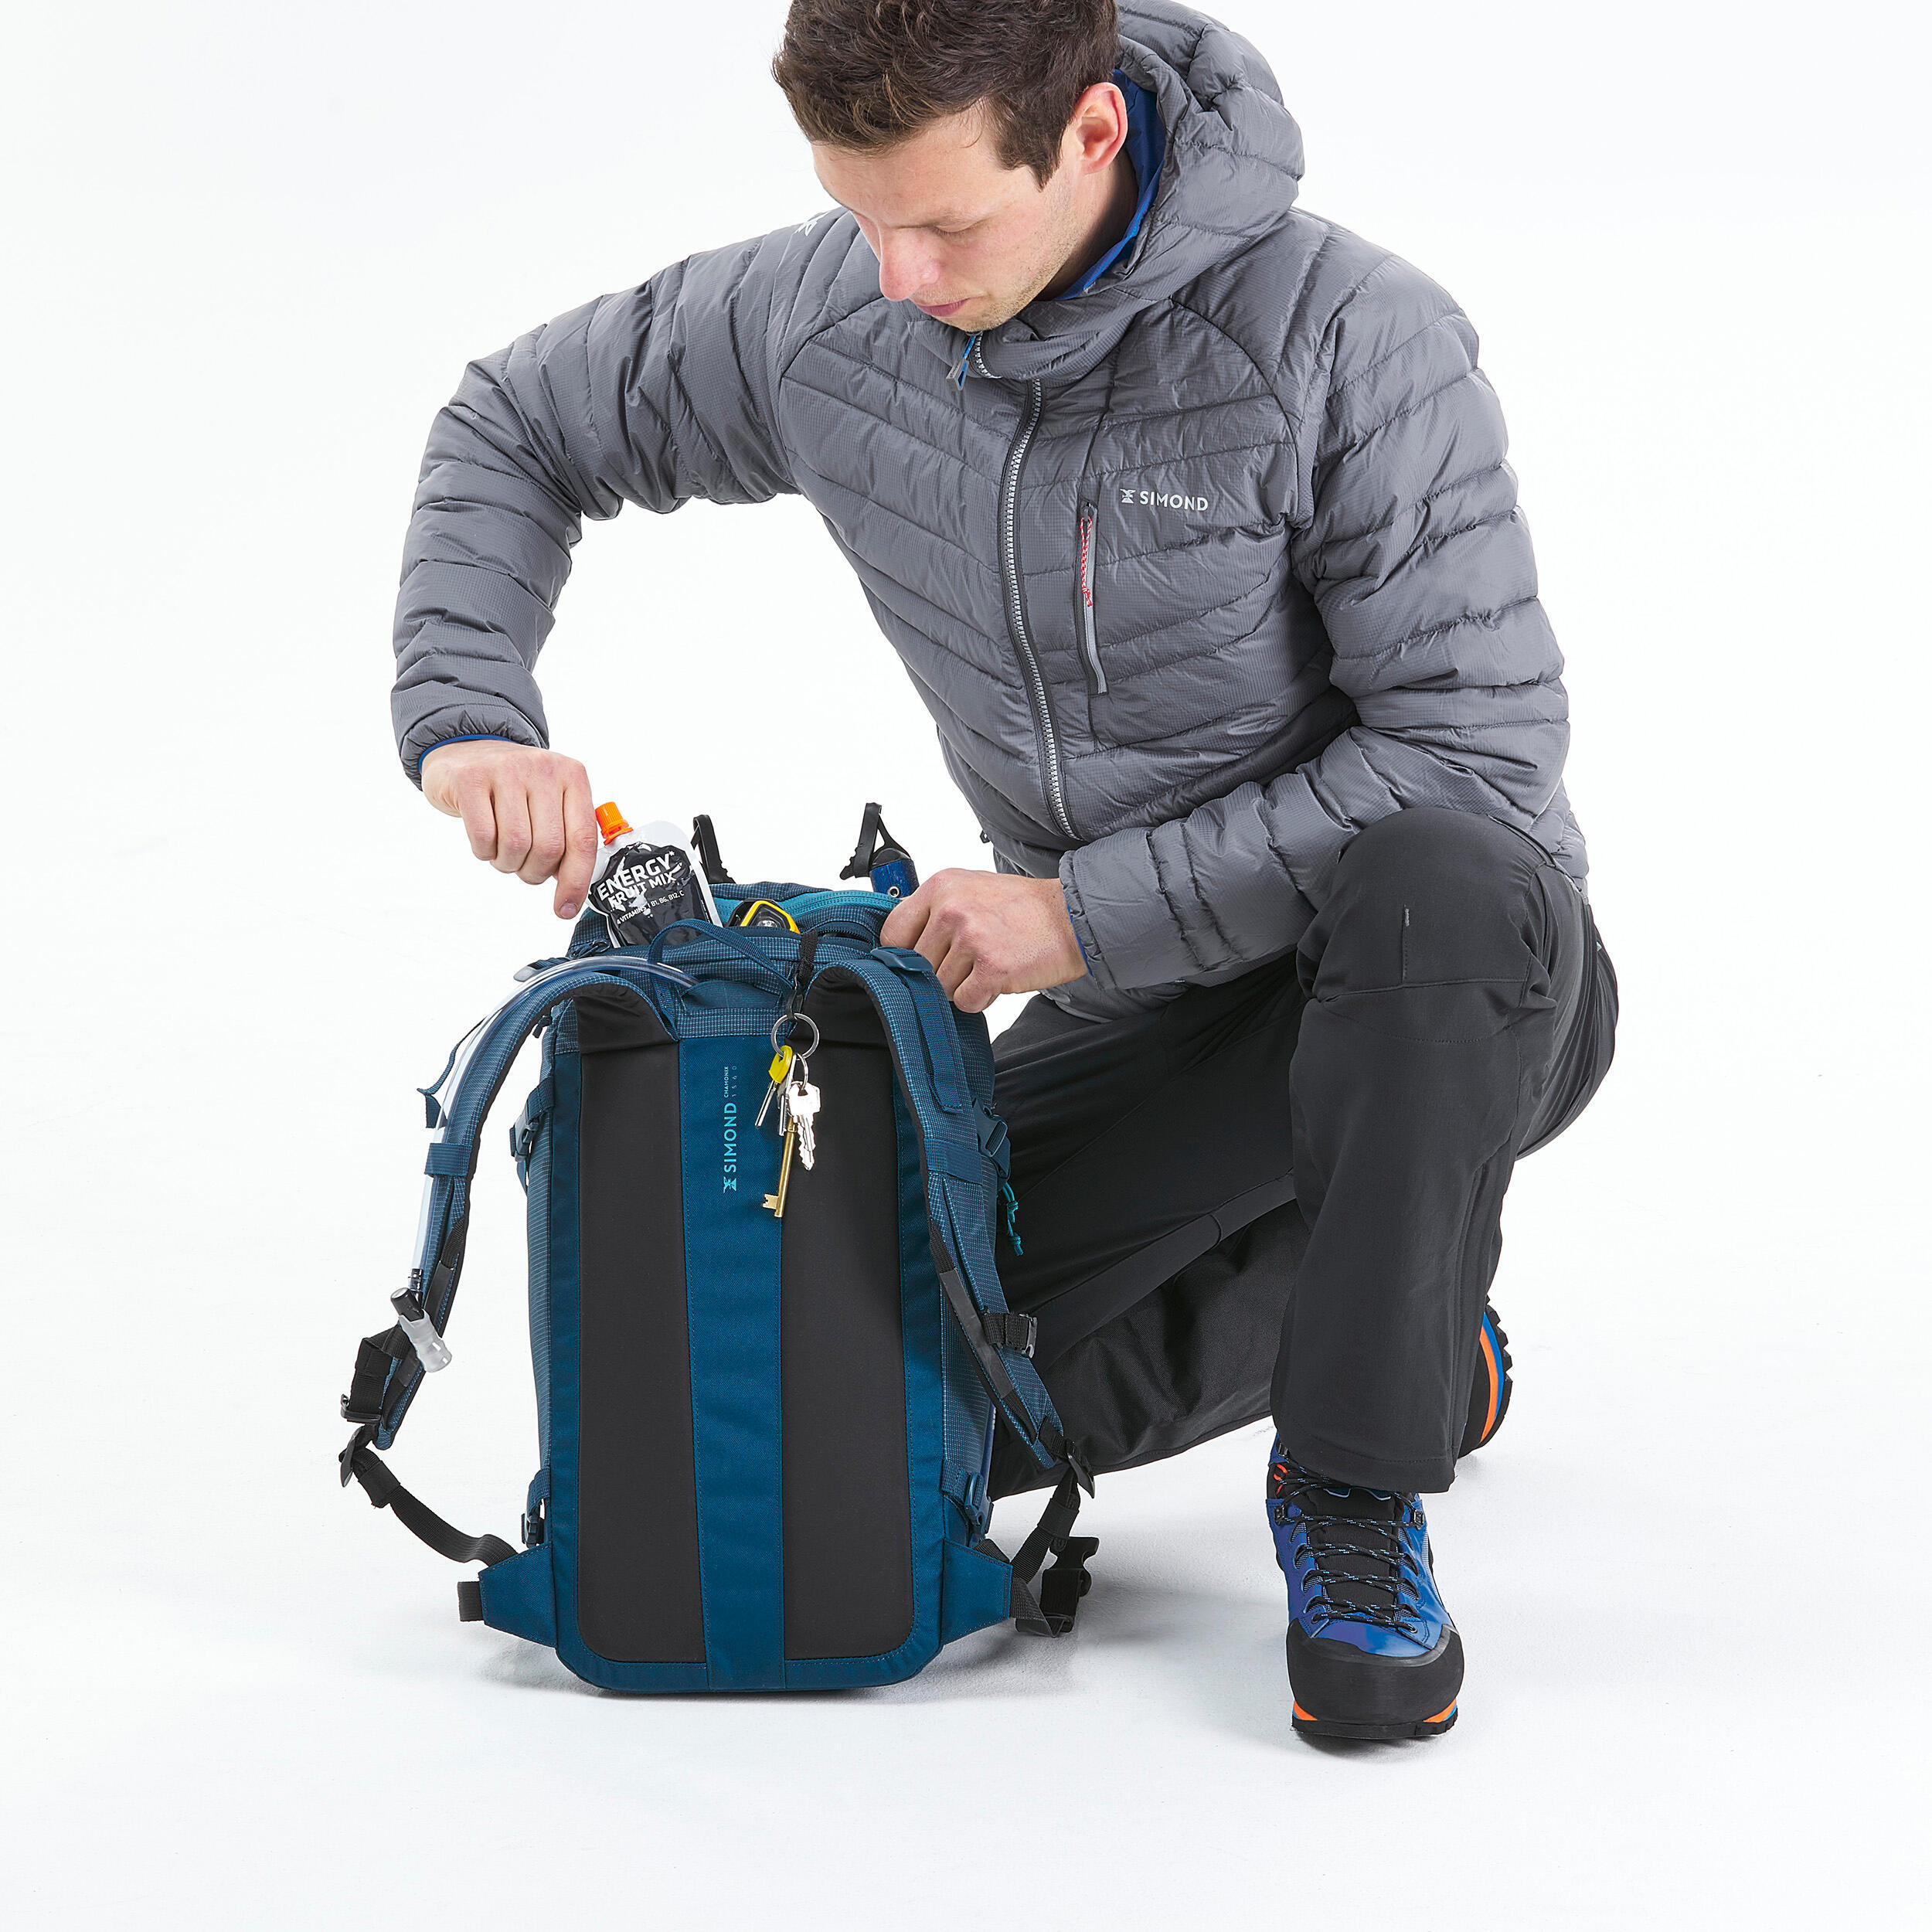 Mountaineering backpack 22 litres - MOUNTAINEERING 22 - GREEN BLUE 7/12